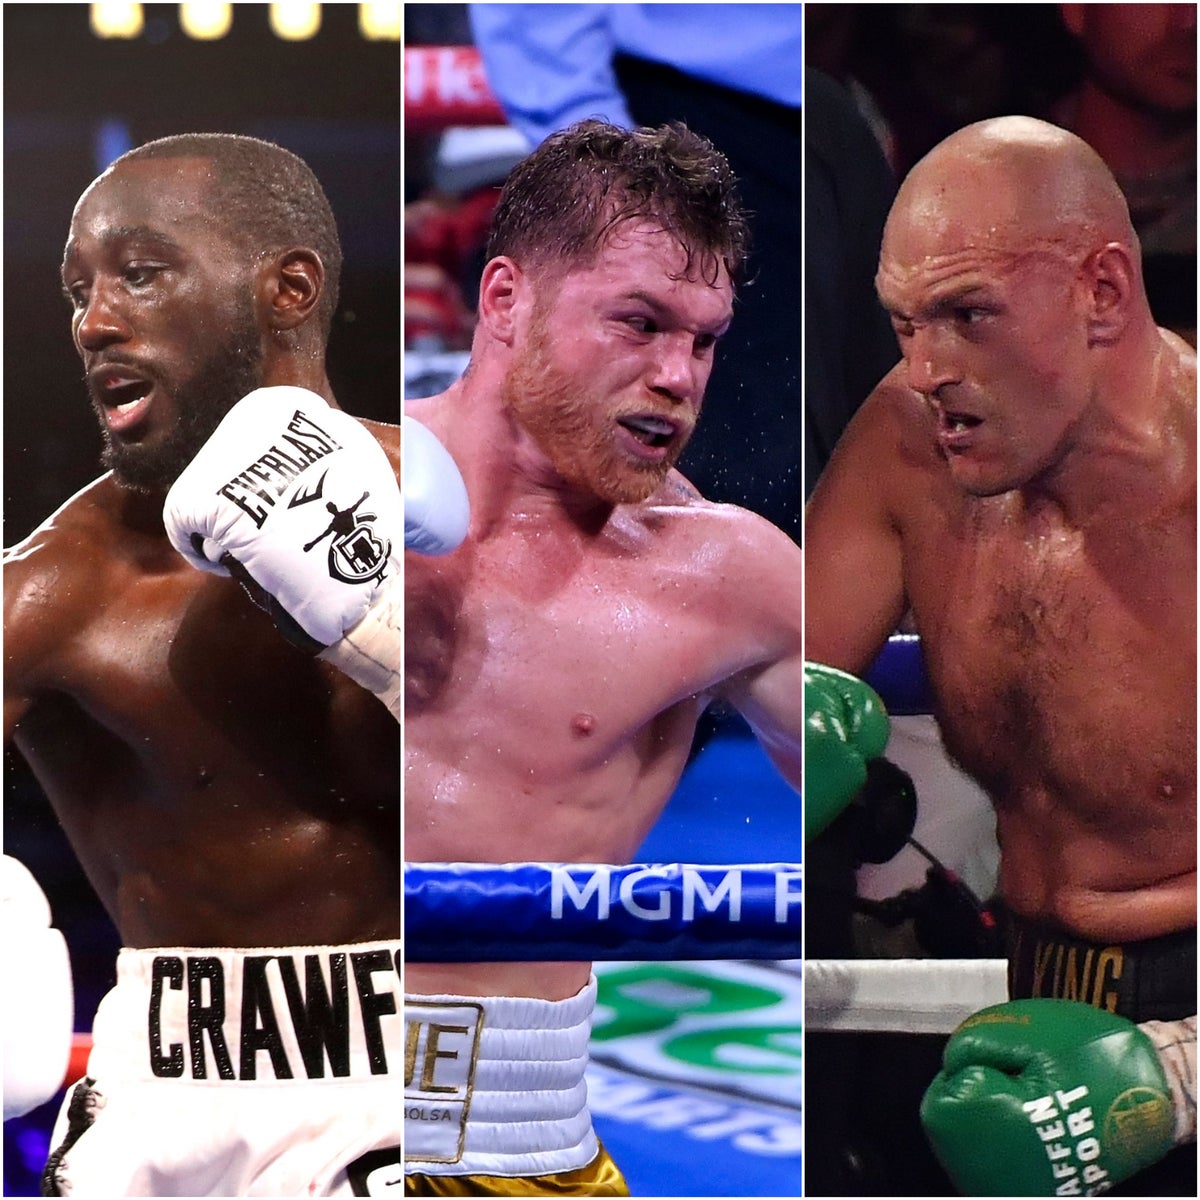 Who are the 10 best black fighters in the world currently?